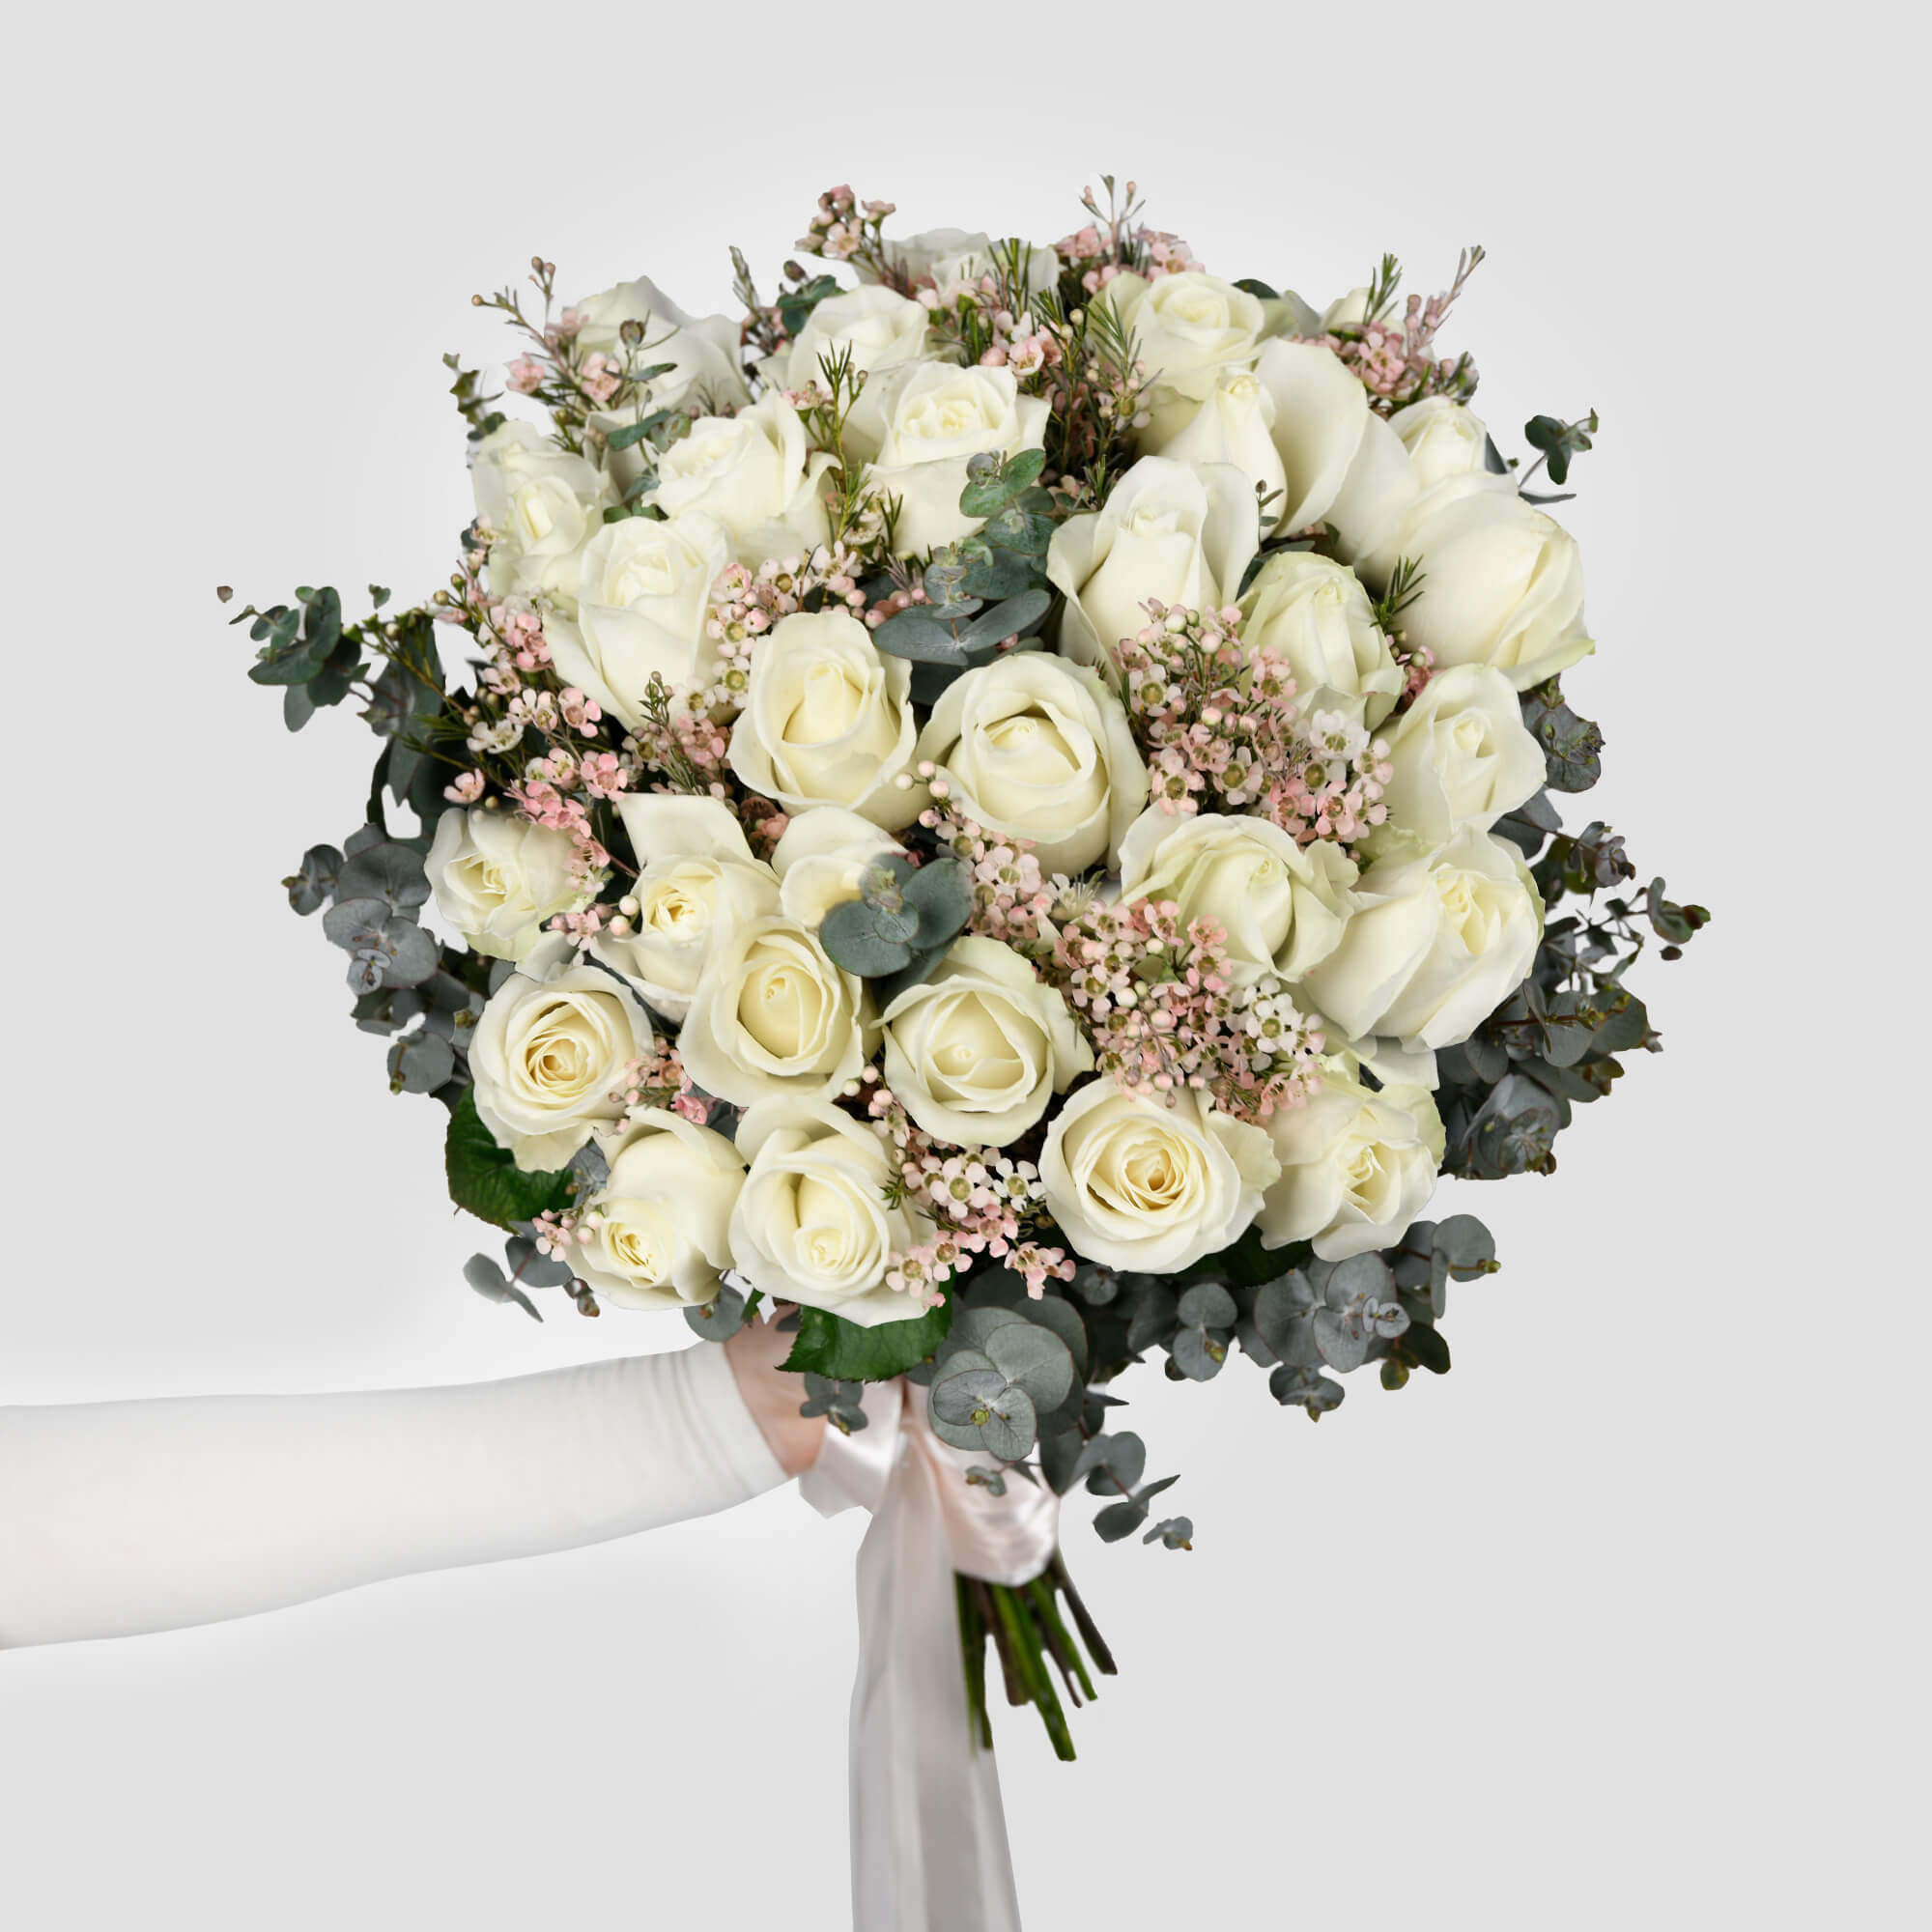 Bouquet with white roses and wax